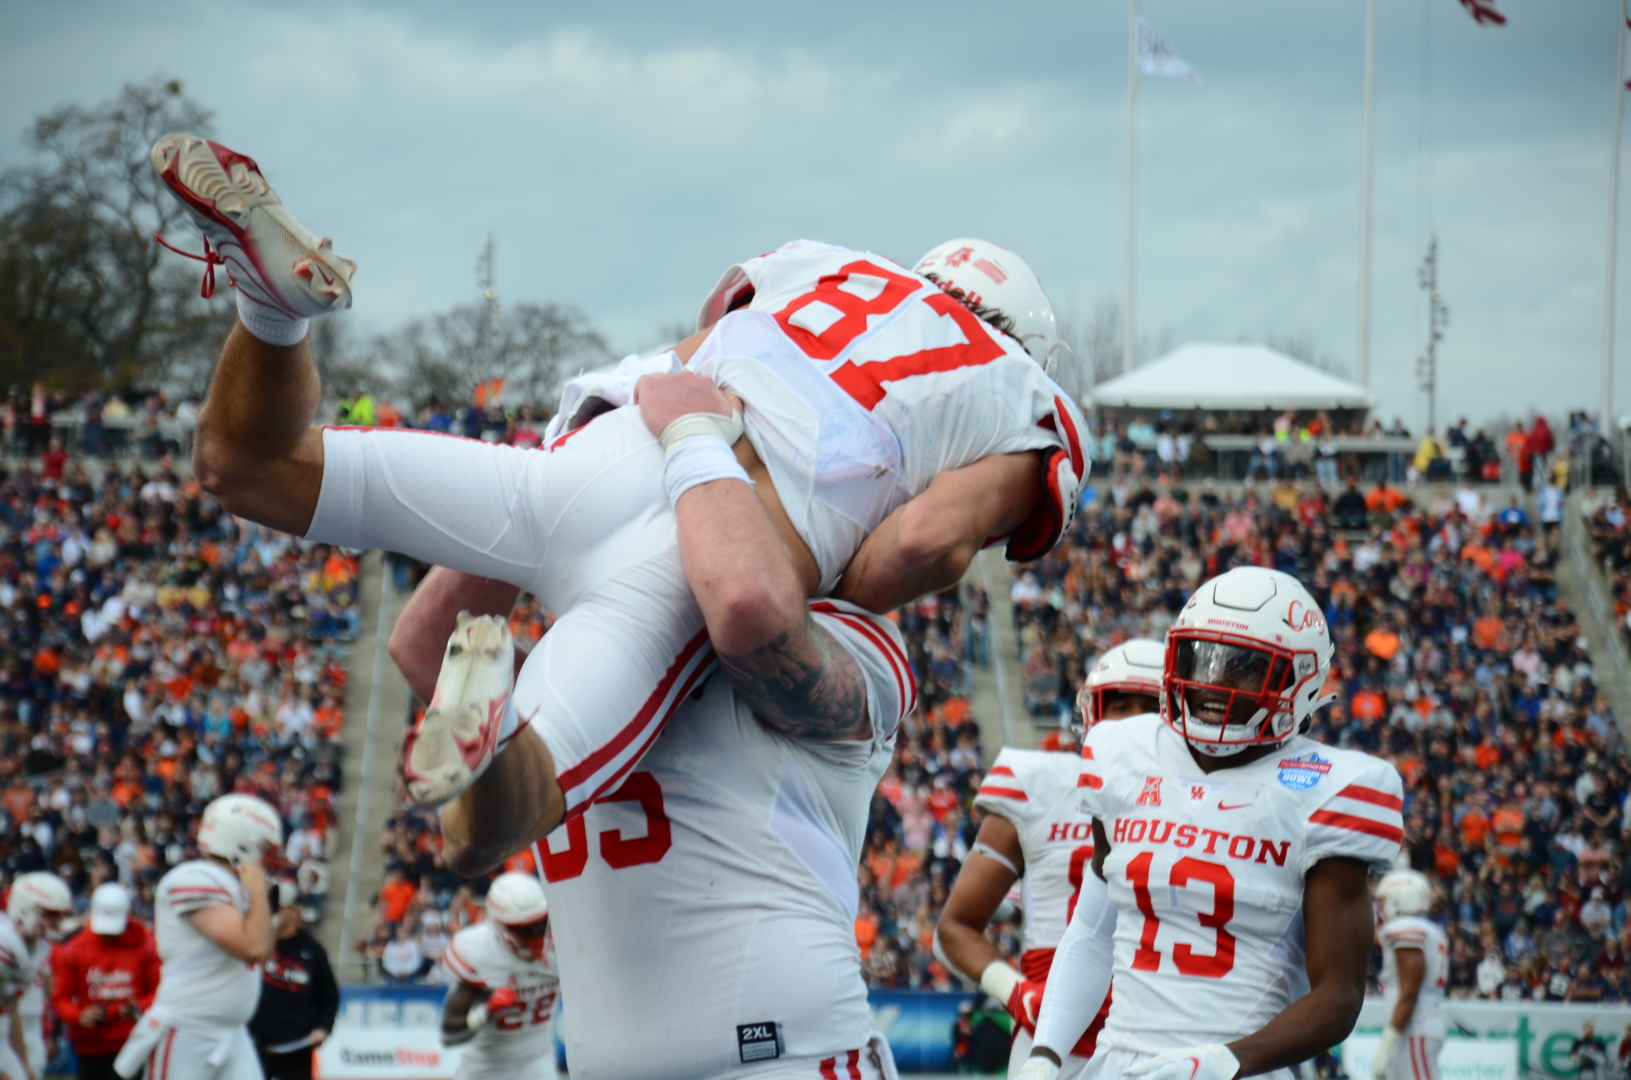 UH center Kody Russey lifts Jake Herslow into the air after what ended up being the game-winning touchdown in the Birmingham Bowl. | Steven Paultanis/The Cougar